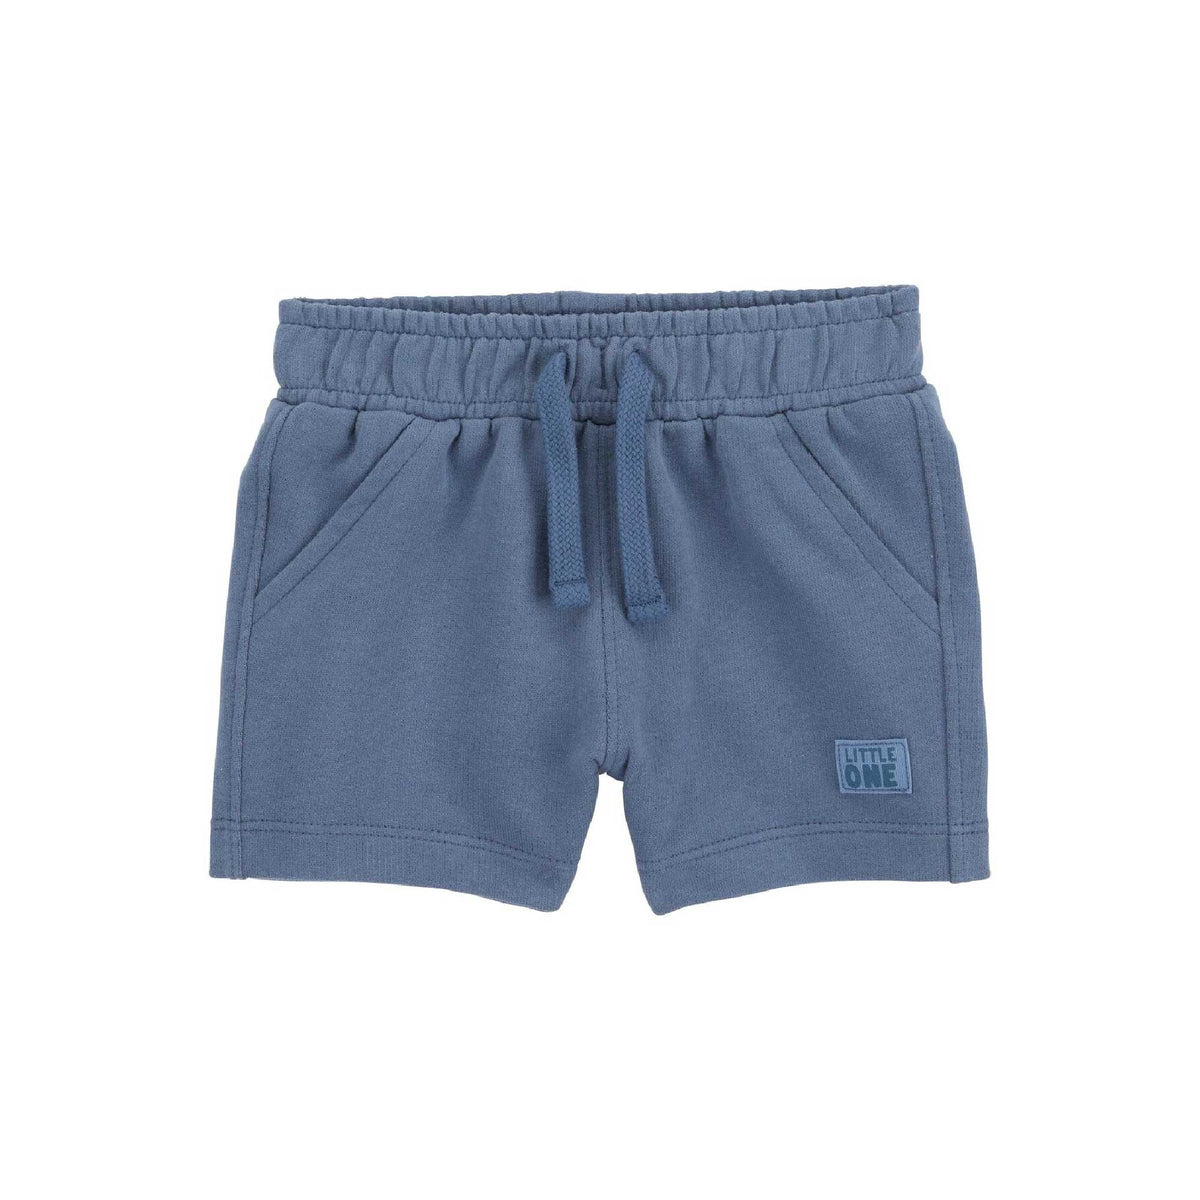 Carter's blue home casual shorts (6M-24M)